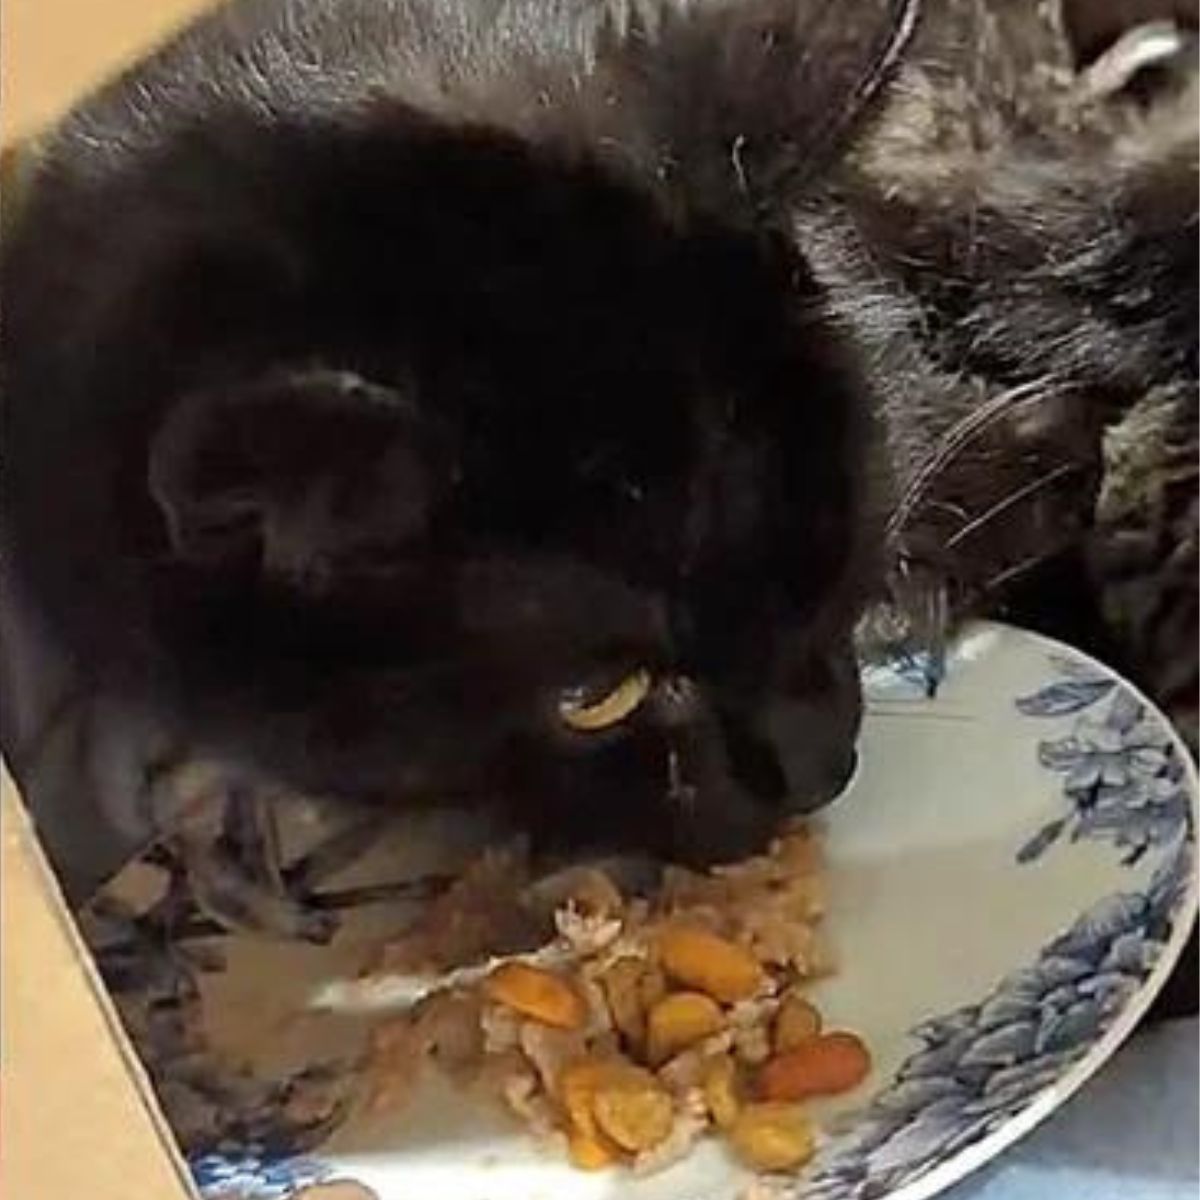 black cat eating from plate